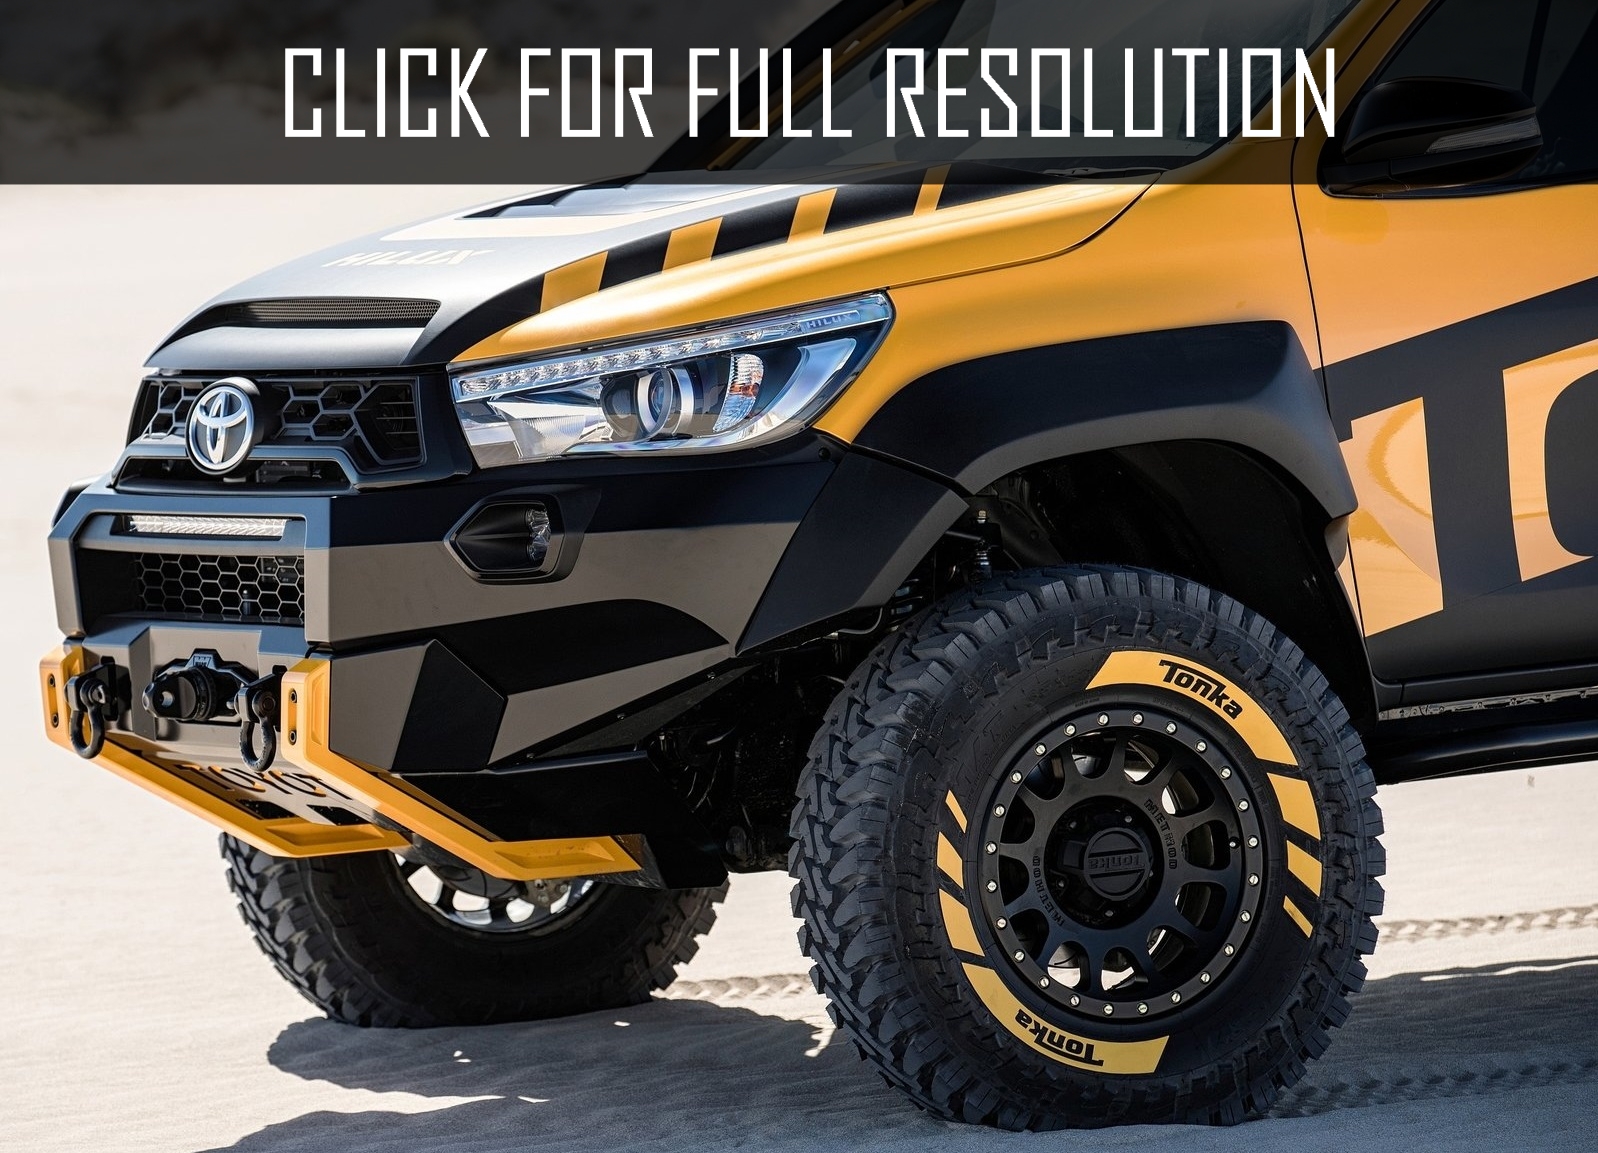 Toyota Hilux Modified